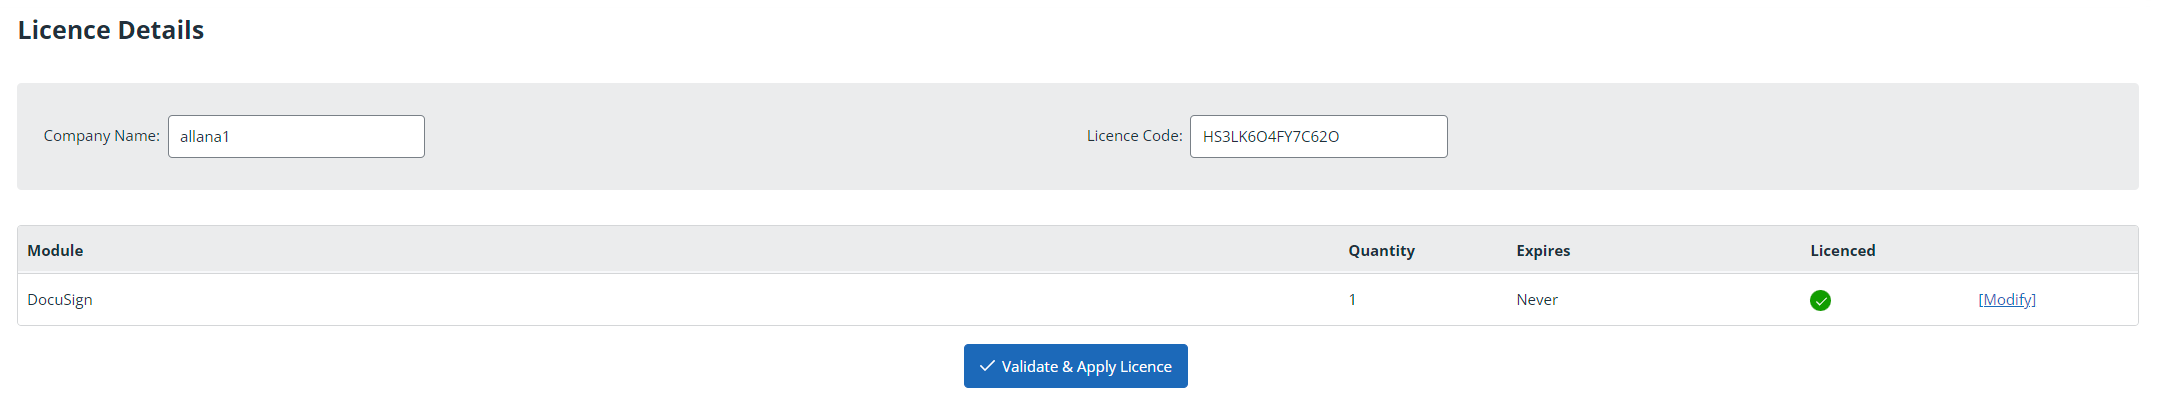 Licence Details page showing docusign licence as 'licenced'.